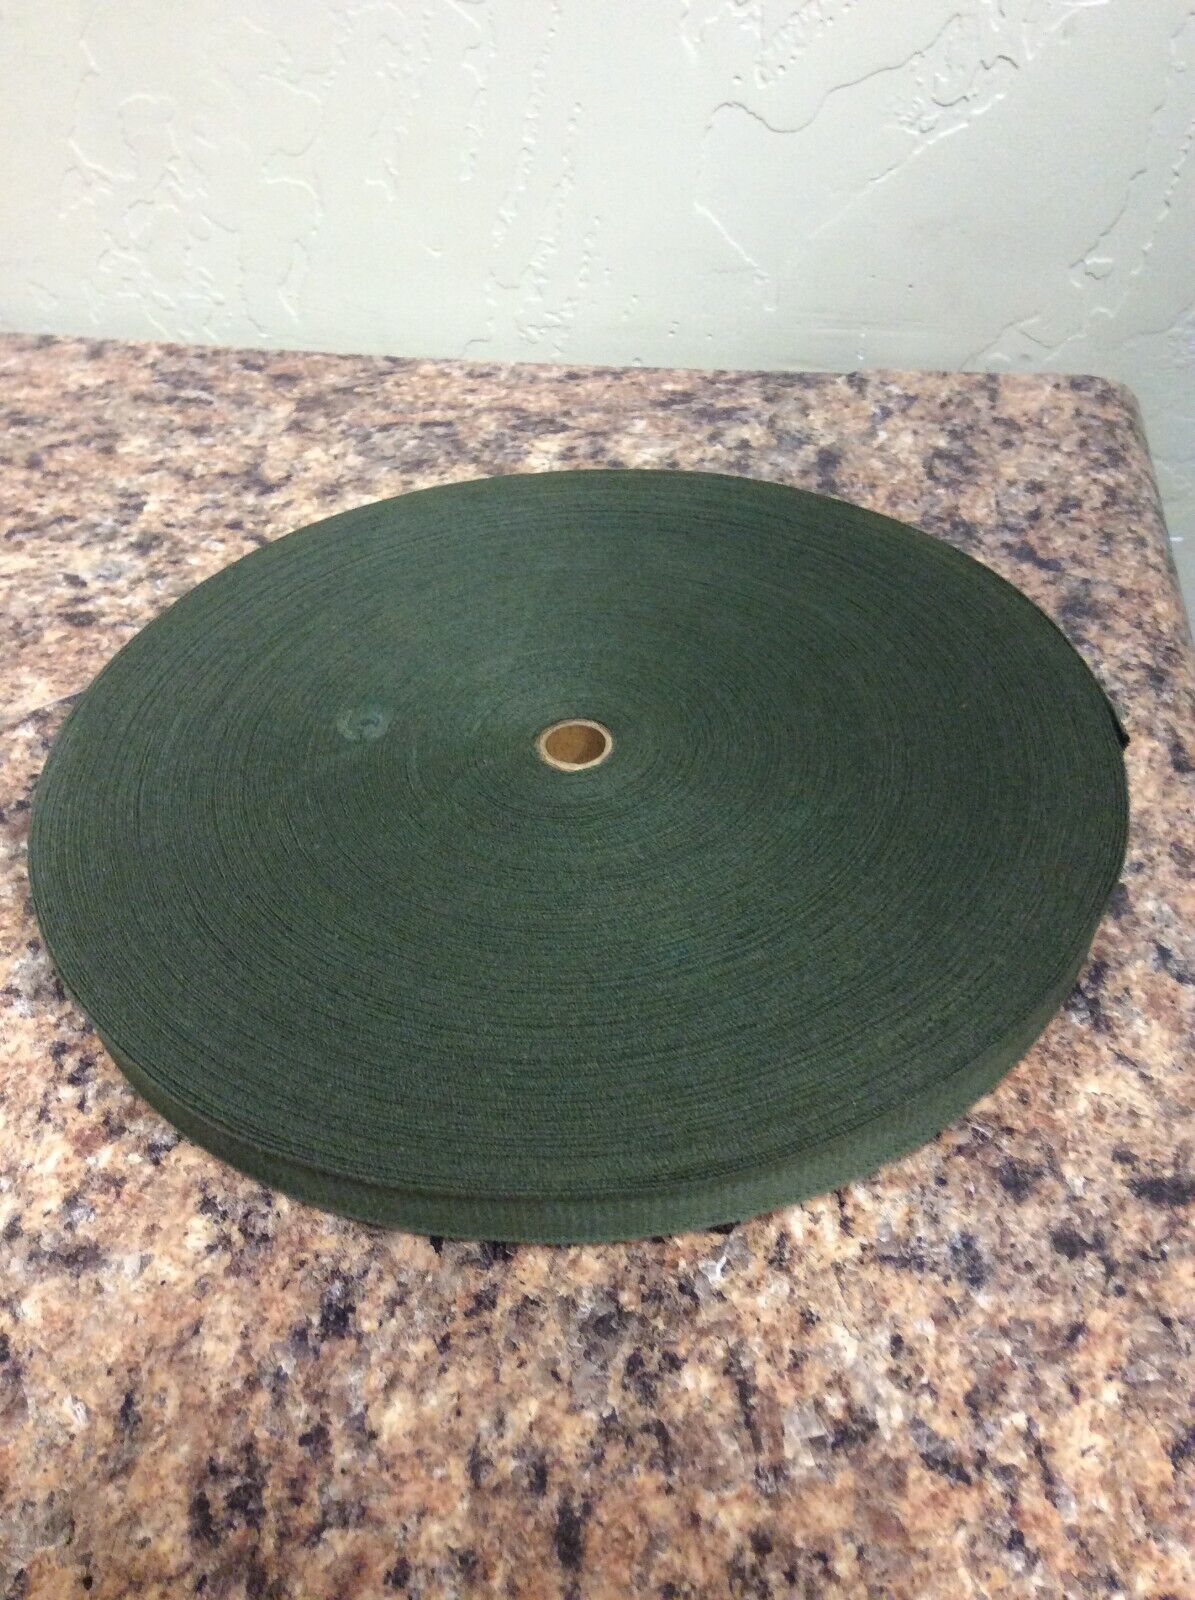 OD GREEN COTTON WEBBING MATERIAL U.S MILITARY 3/4 INCH BY 90 YARD ROLL